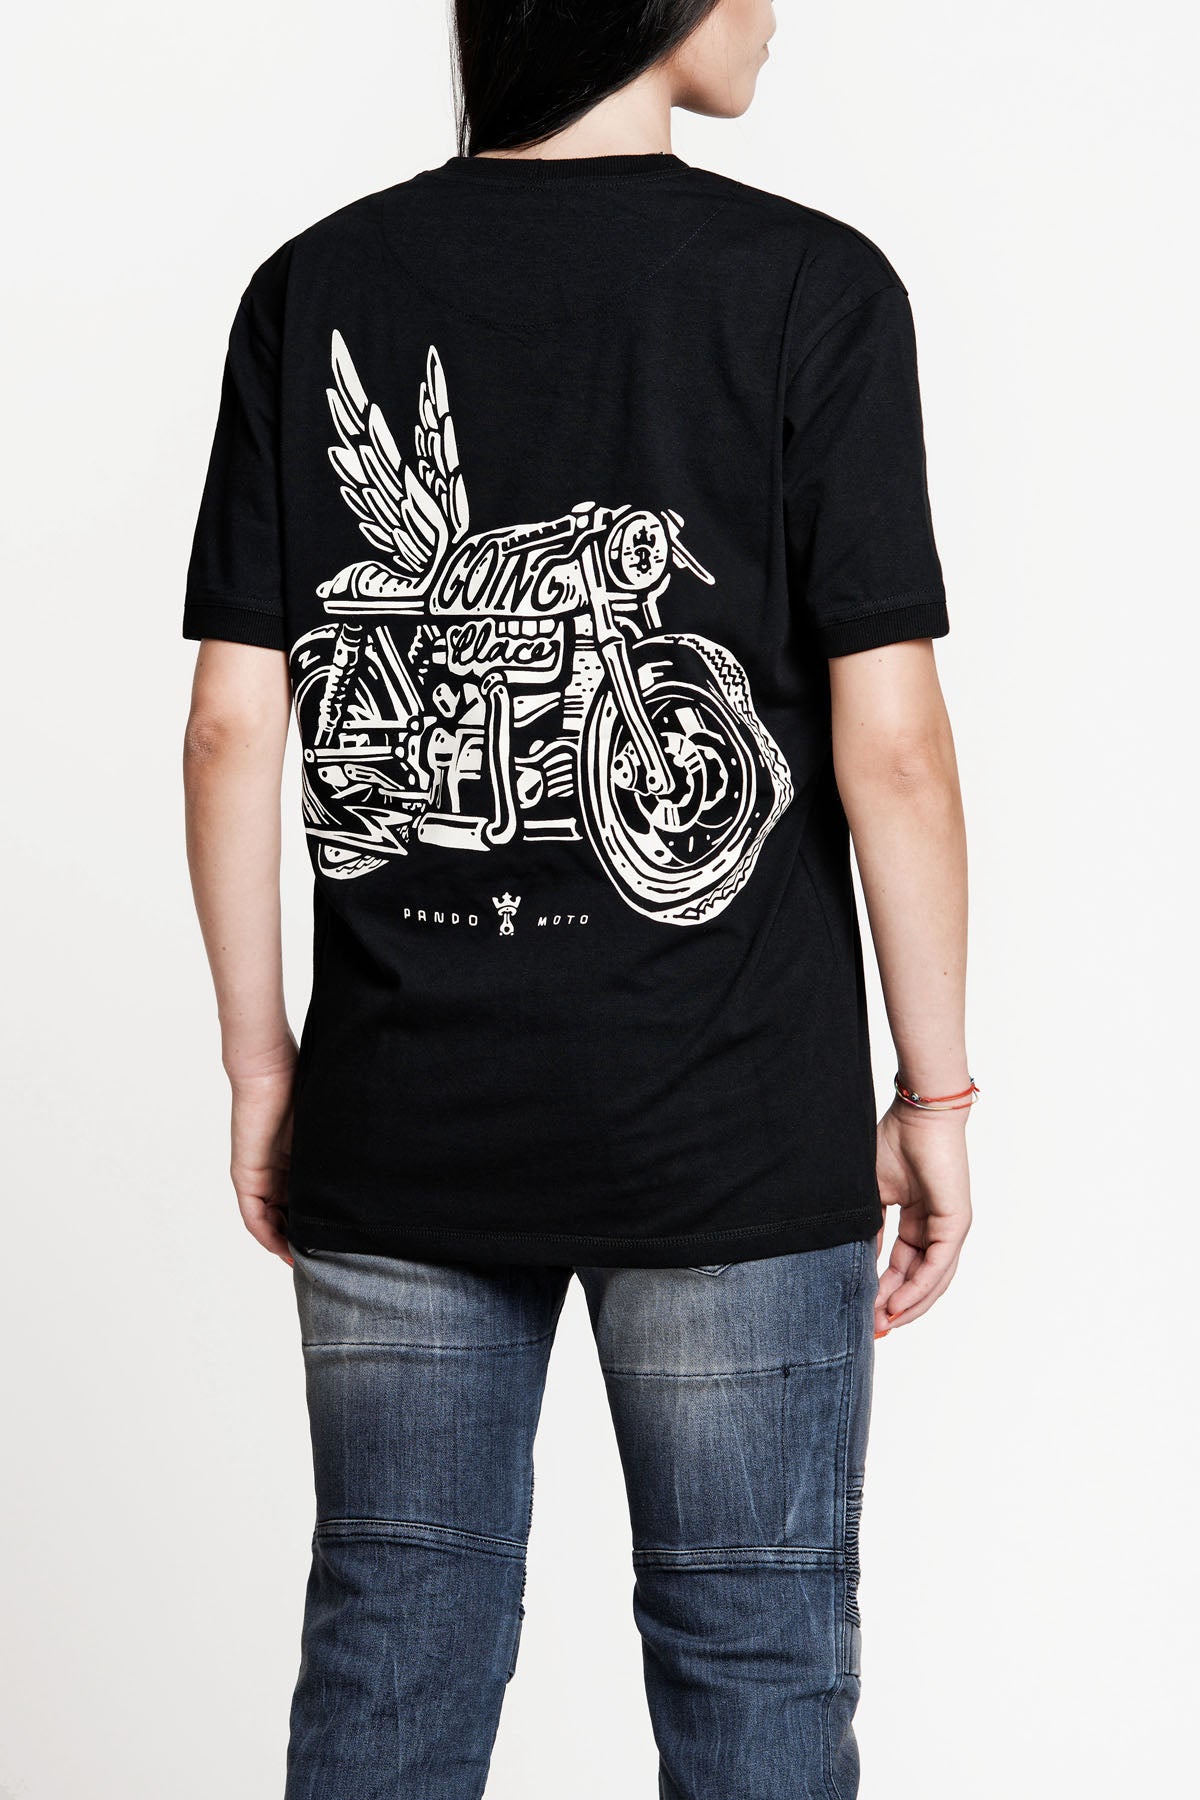 A woman wearing Pando Moto motorcycle t-shirt with the picture of a motorcycle with wings and title that says &quot;going places&quot;